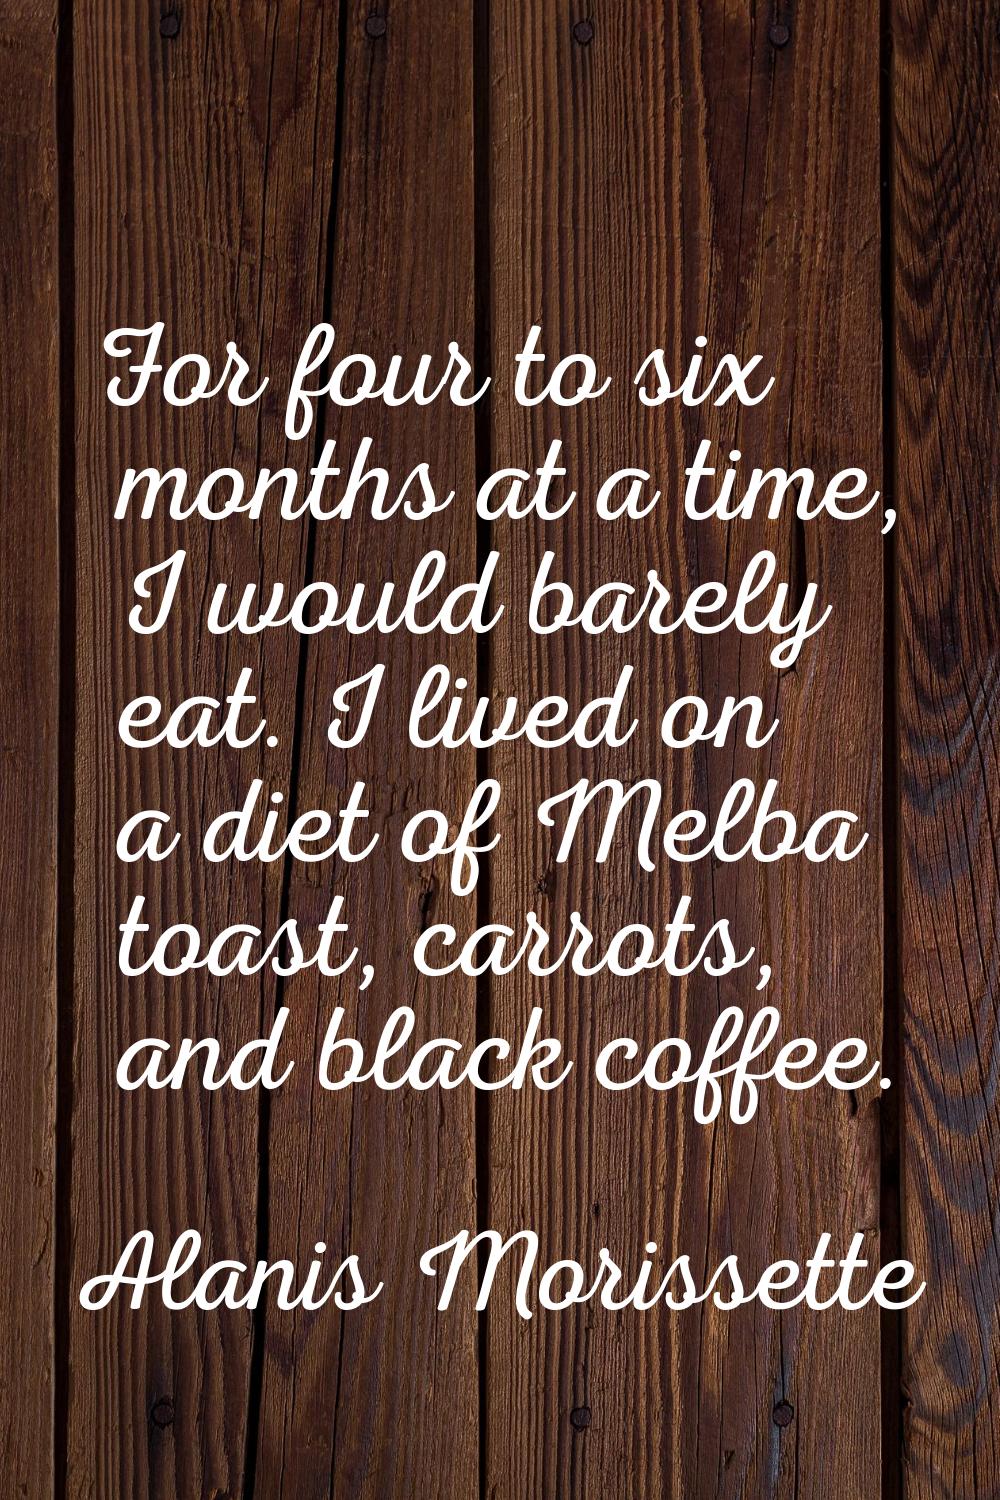 For four to six months at a time, I would barely eat. I lived on a diet of Melba toast, carrots, an